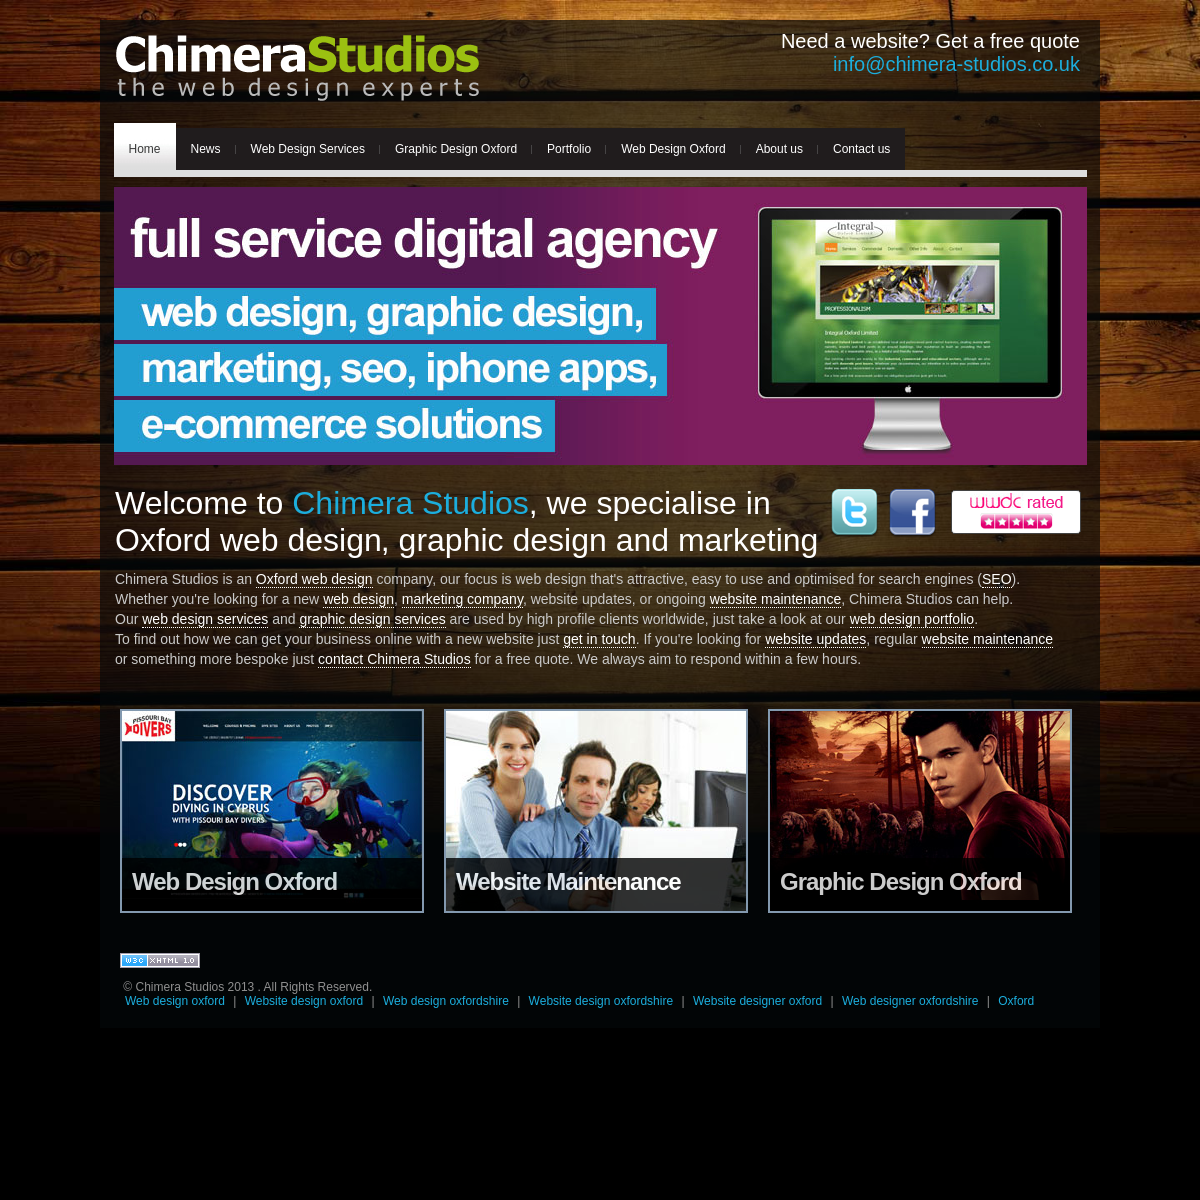 A complete backup of chimera-studios.co.uk